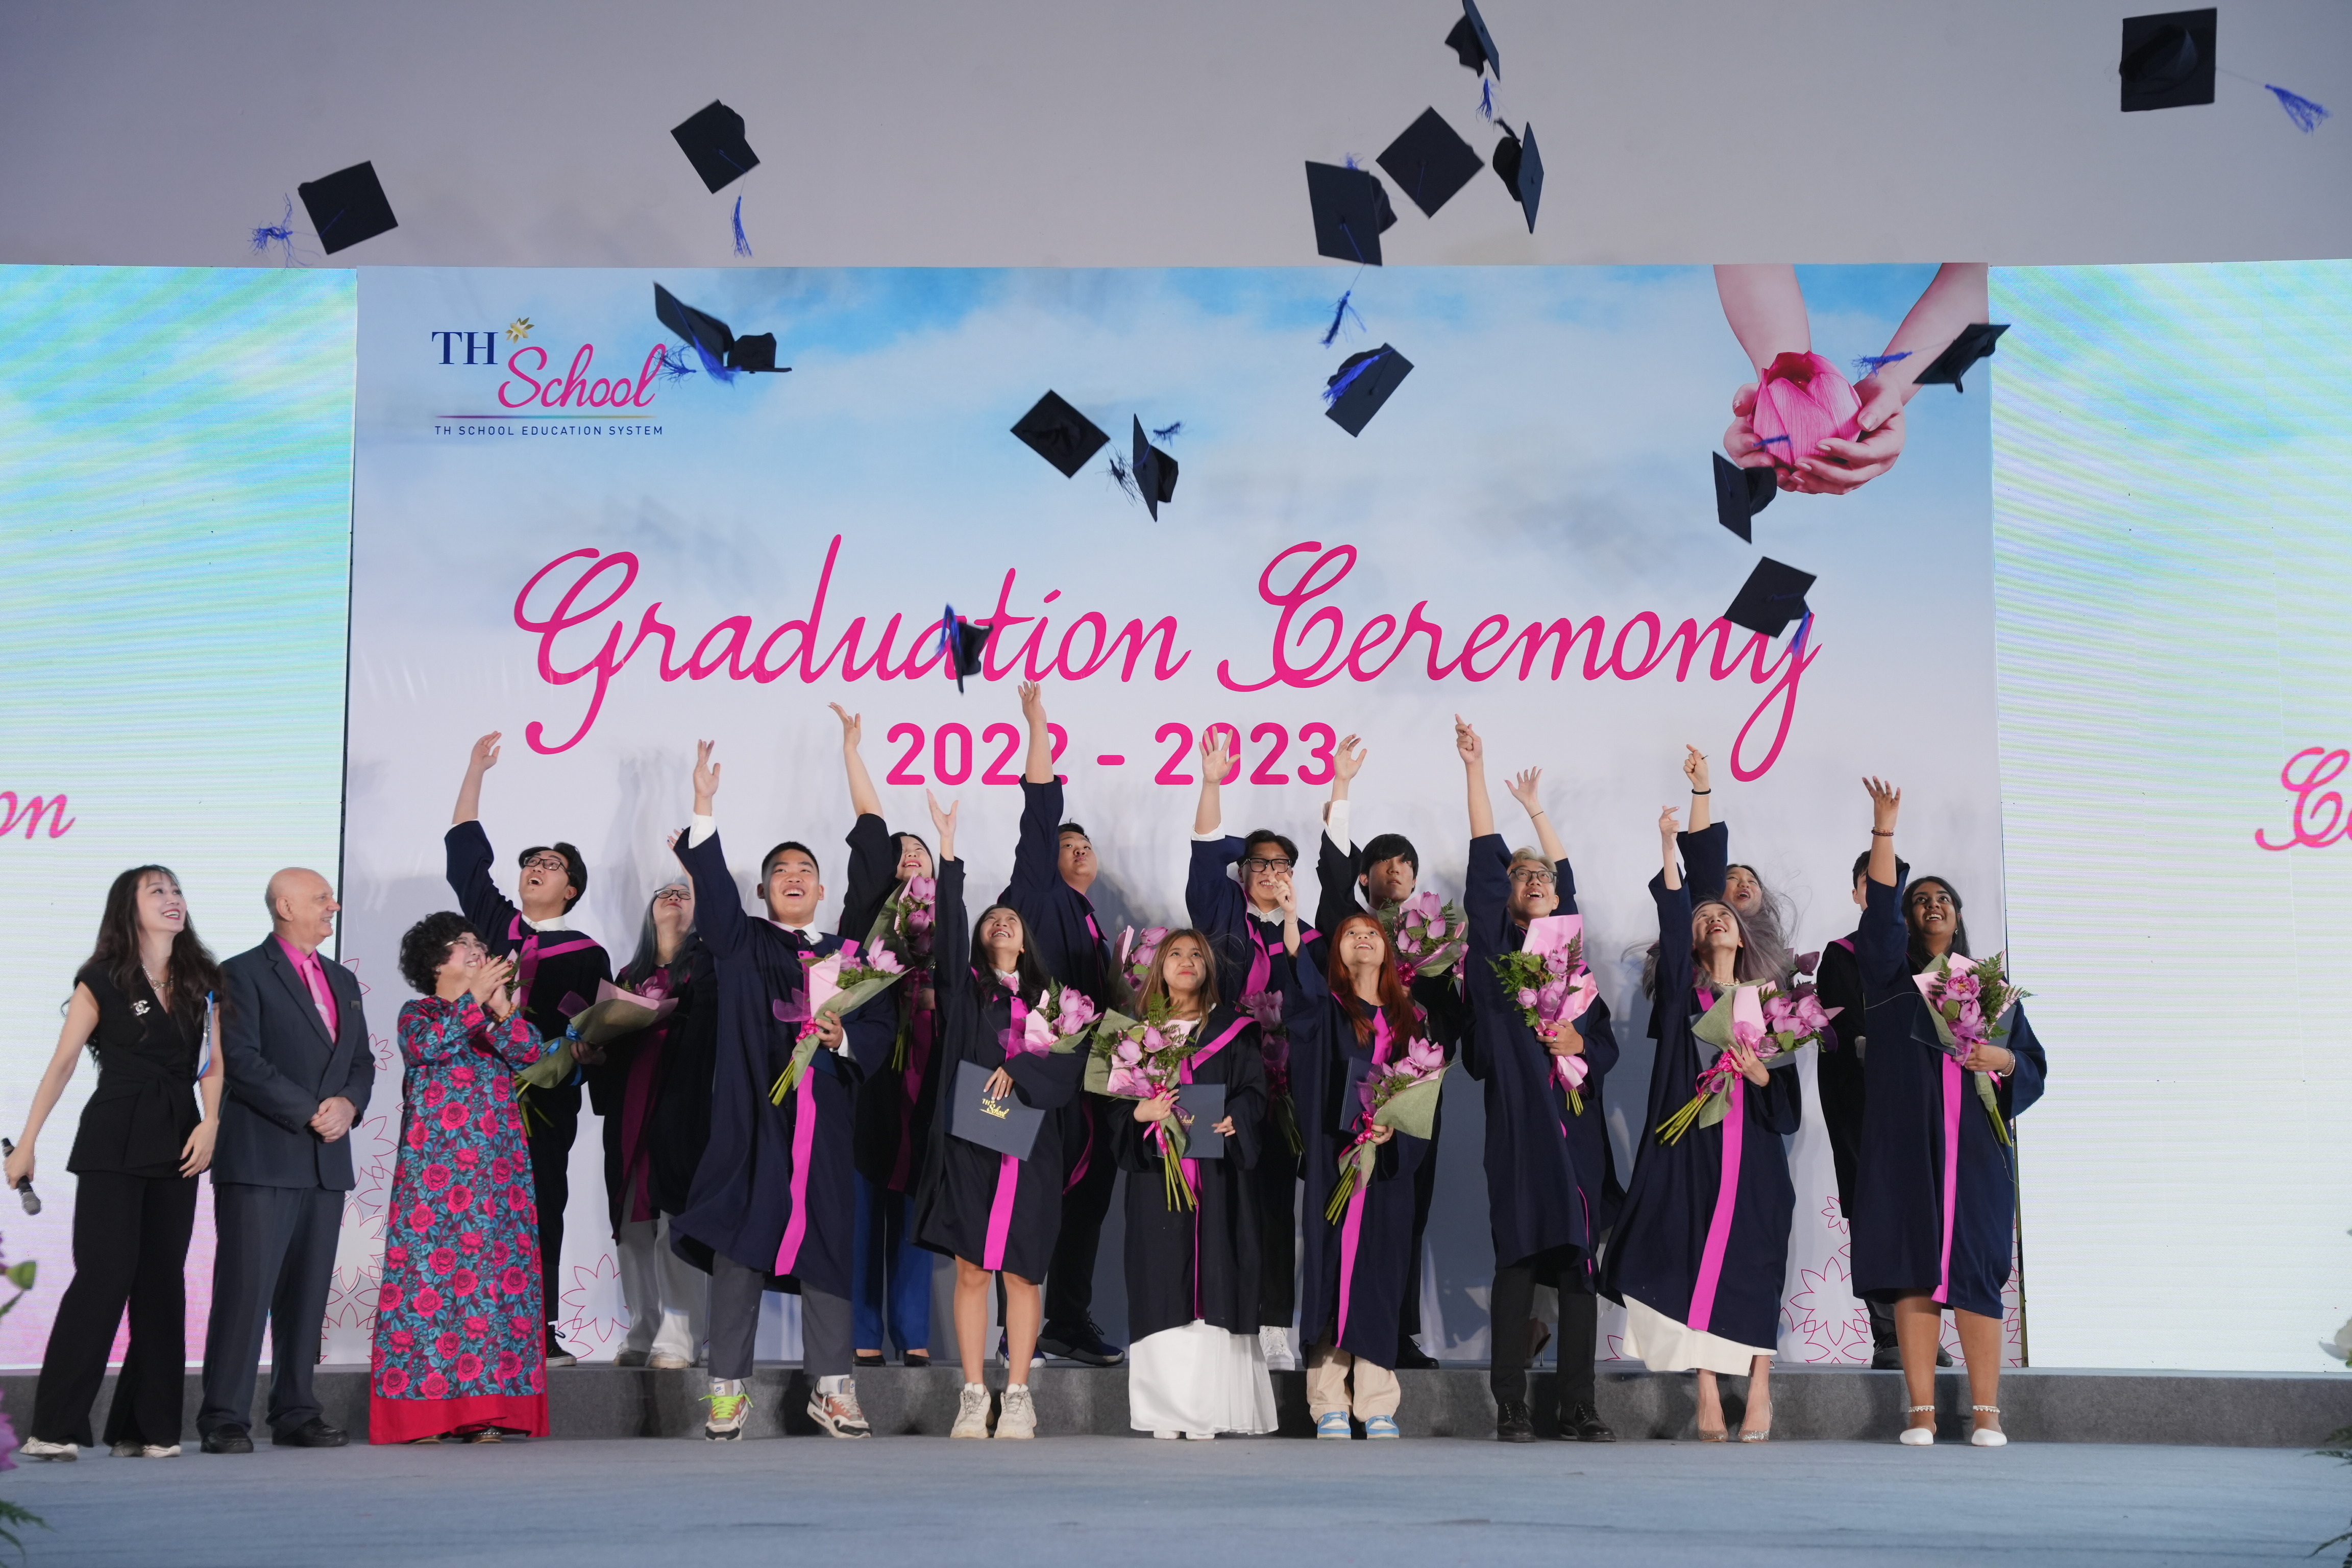 Graduation Ceremony for Grade 12th students at TH School Chua Boc campus - The journey of the youth moments